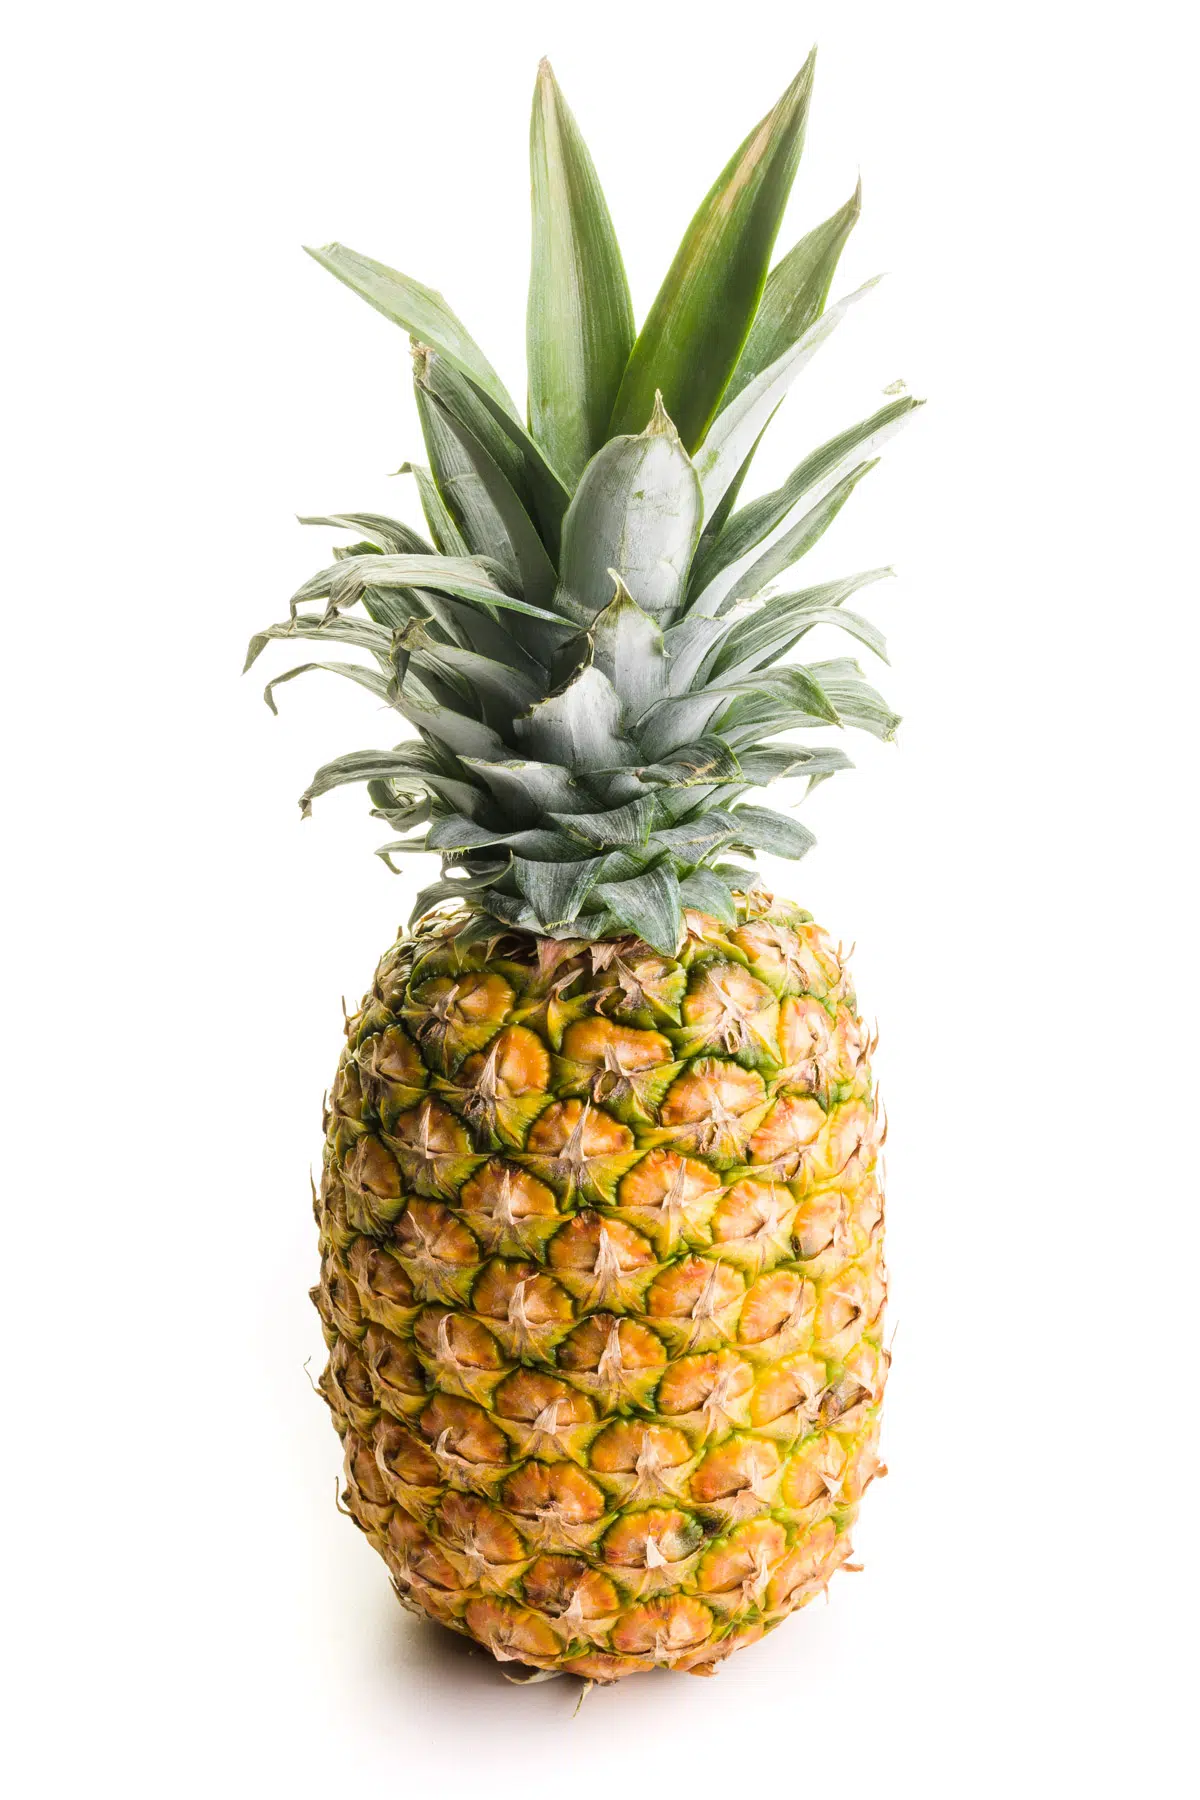 How to Pick the Best Pineapple